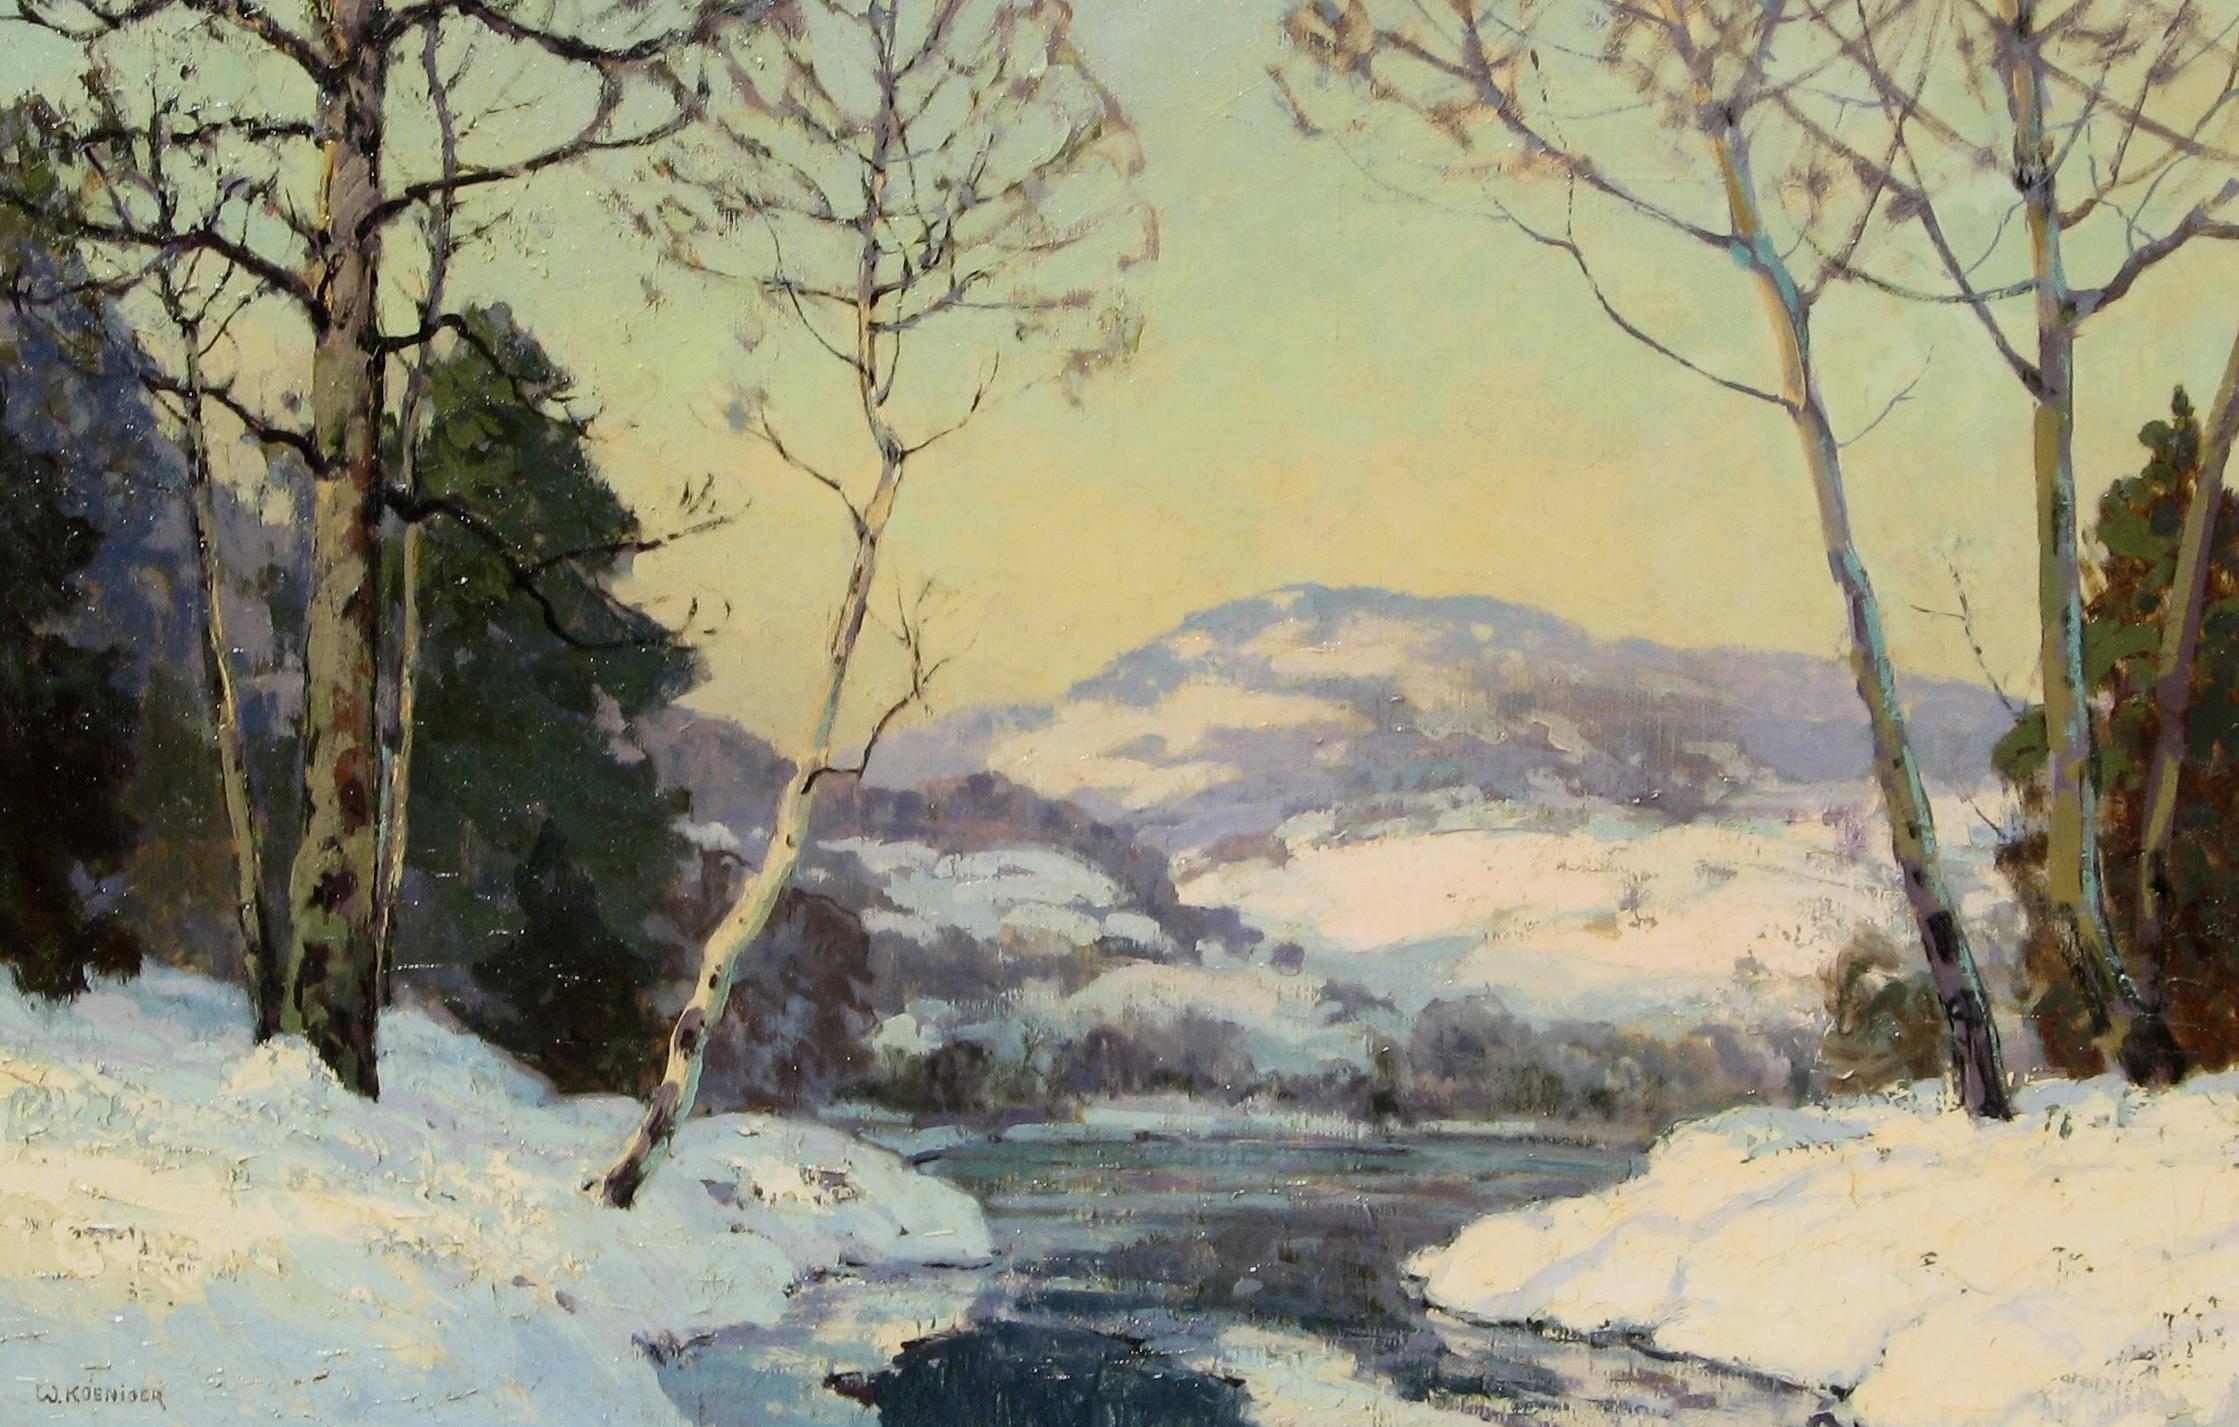 Walter Koeniger (1881-1943) oil on canvas, winter scene. Beautiful river bend in snow. 
Signed W. Koeniger lower left. Measures: 24 x 36. The frame measures 30 x 42 inches.
In excellent condition. 

Known as the Painter of Snow; Walter Koeniger was